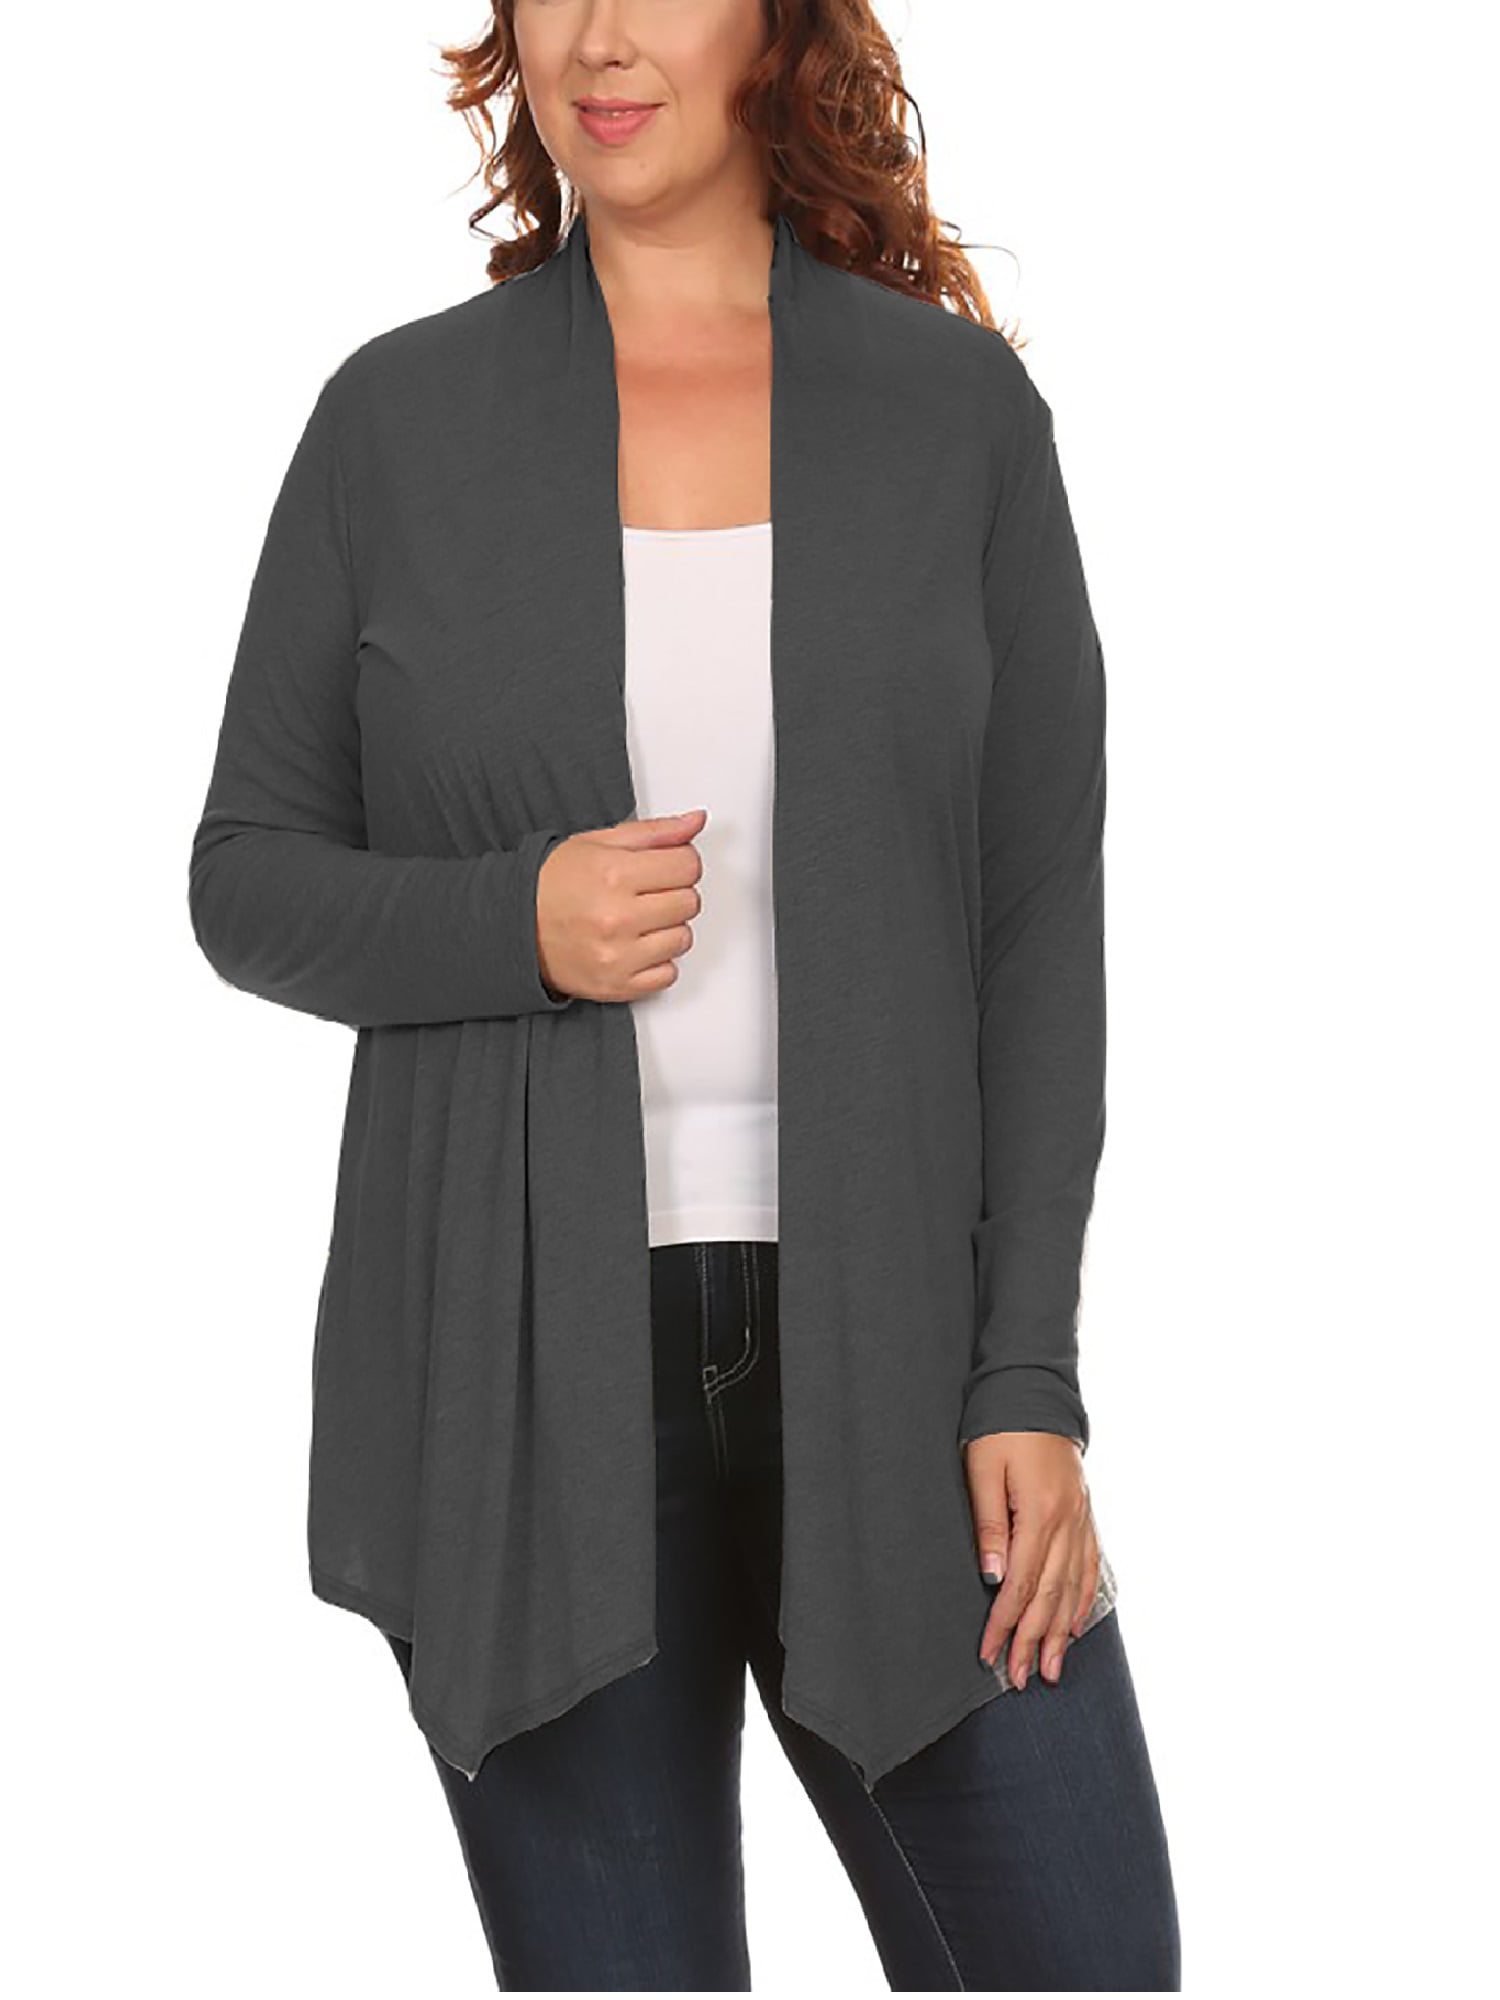 ellos Women's Plus Size Open Front Waffle Thermal Cardigan Sweater 